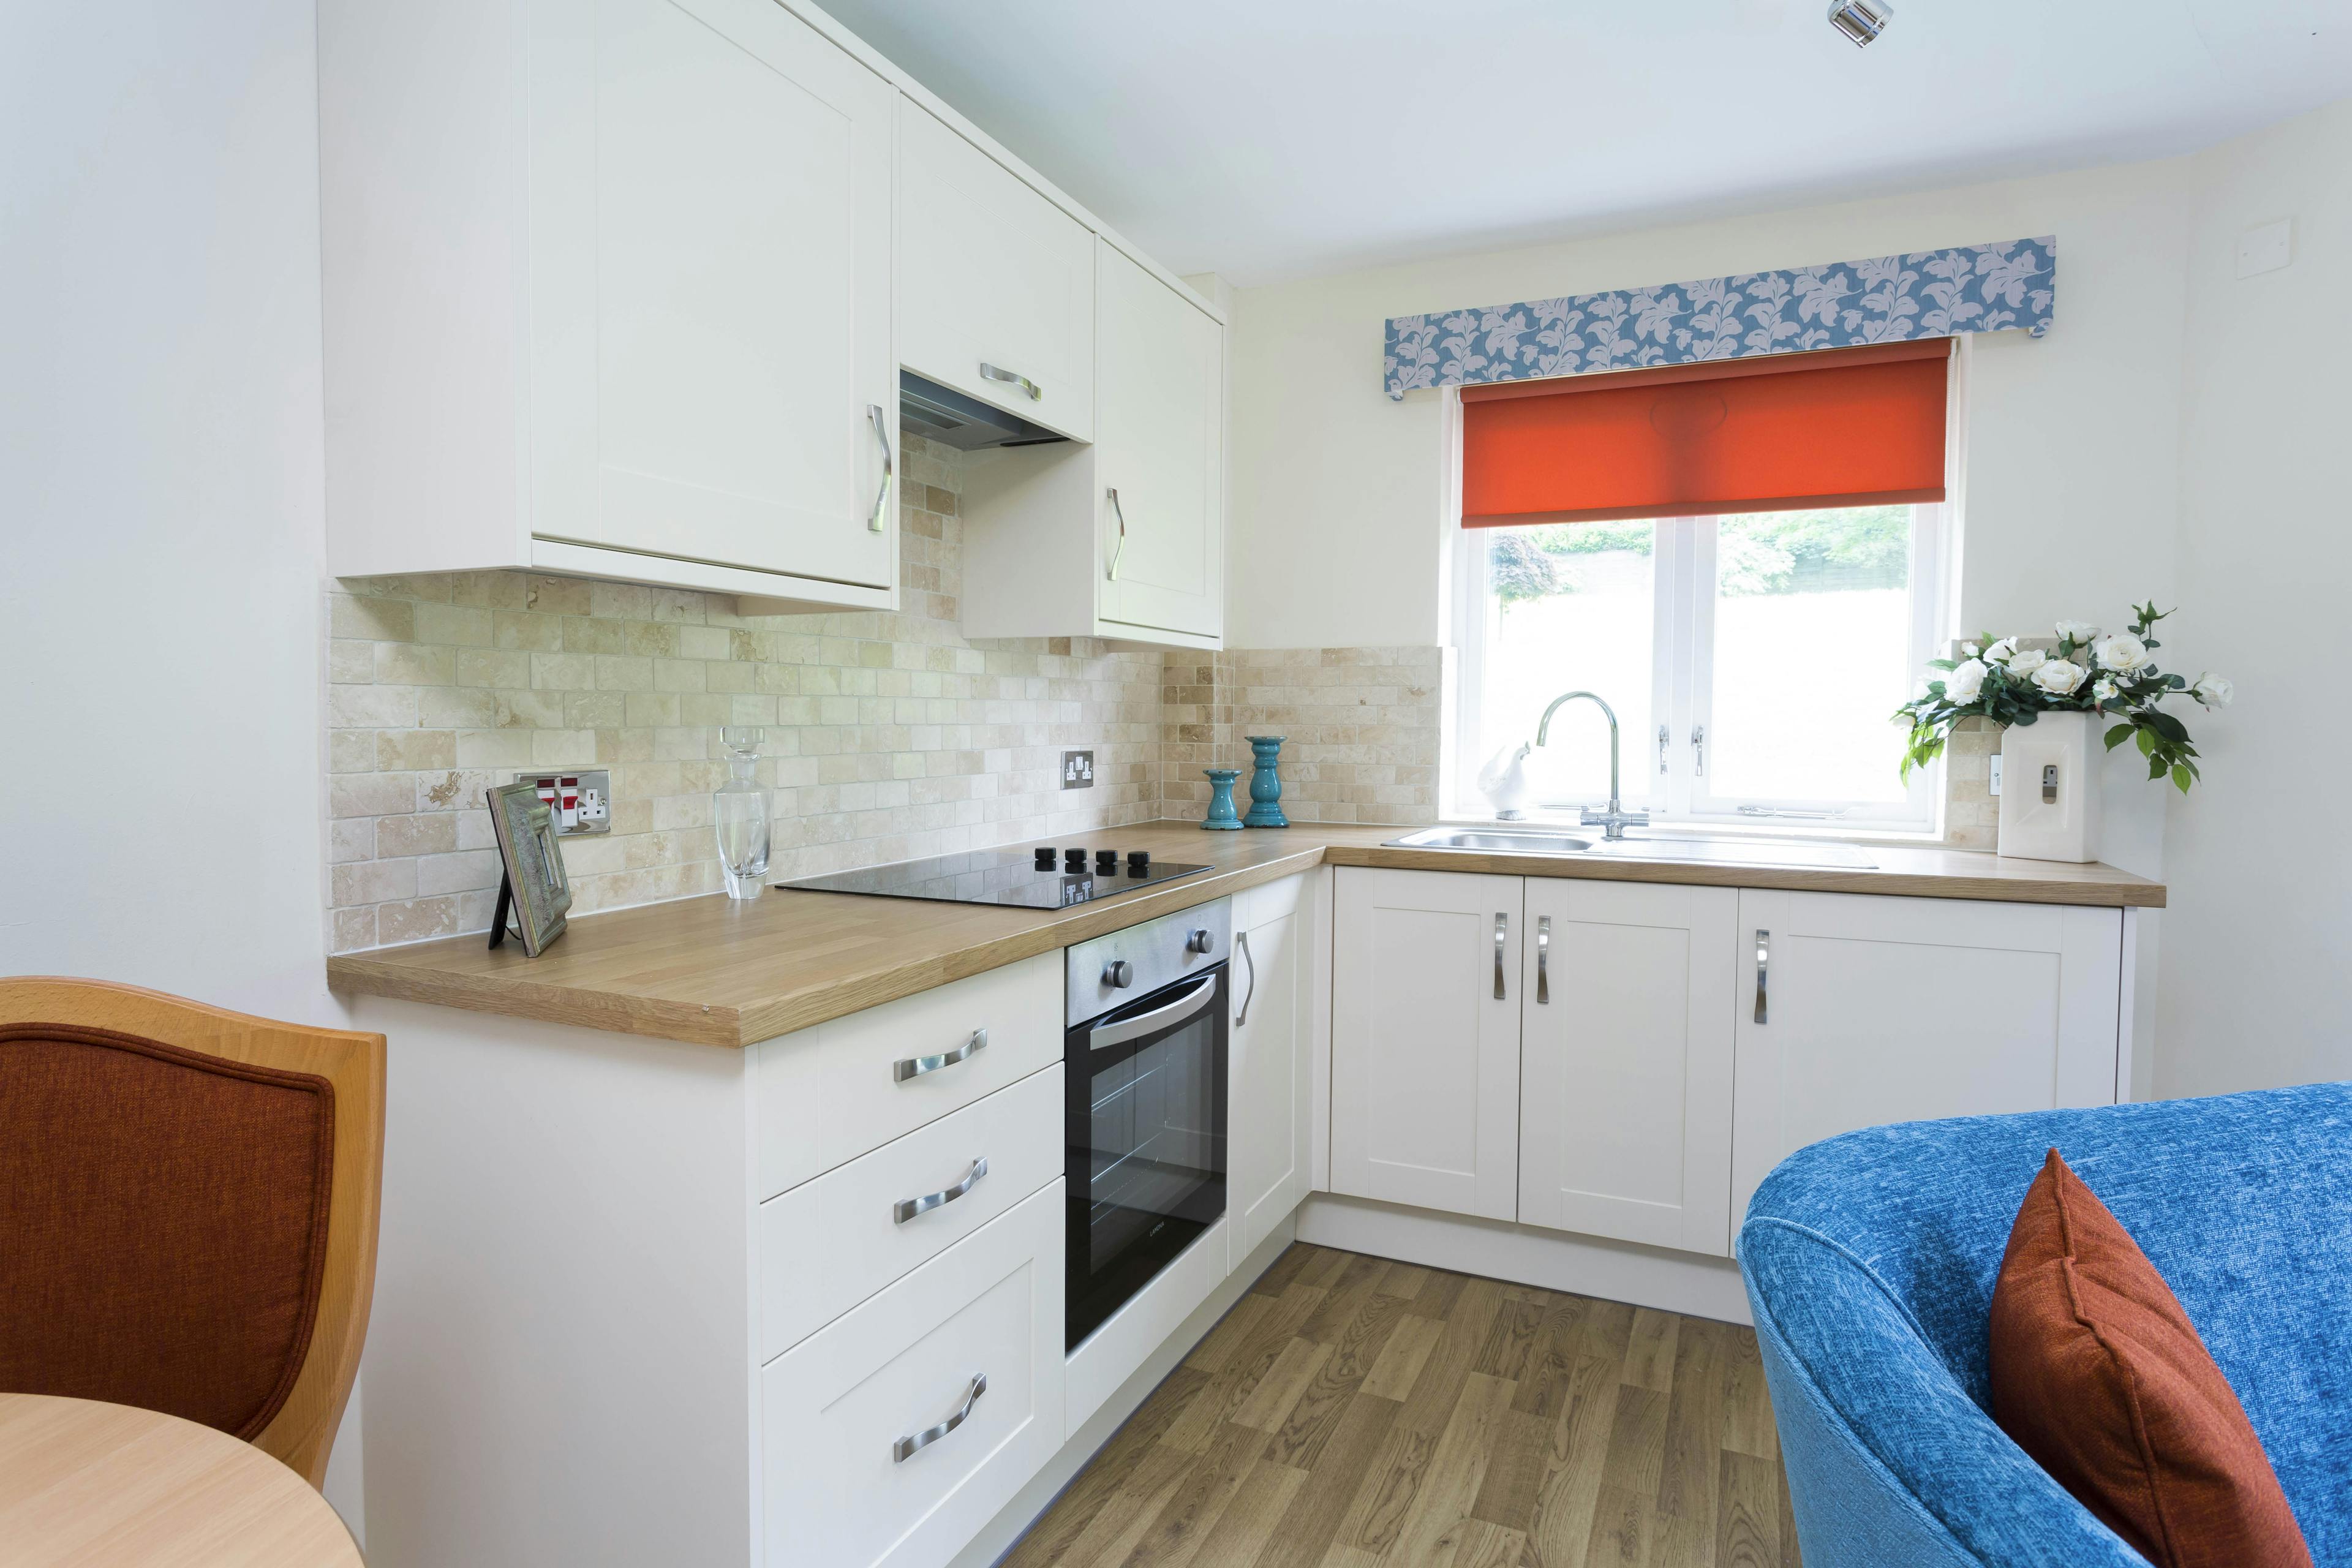 Kitchen at Prestbury Beaumont Care Home in Macclesfield, Cheshire